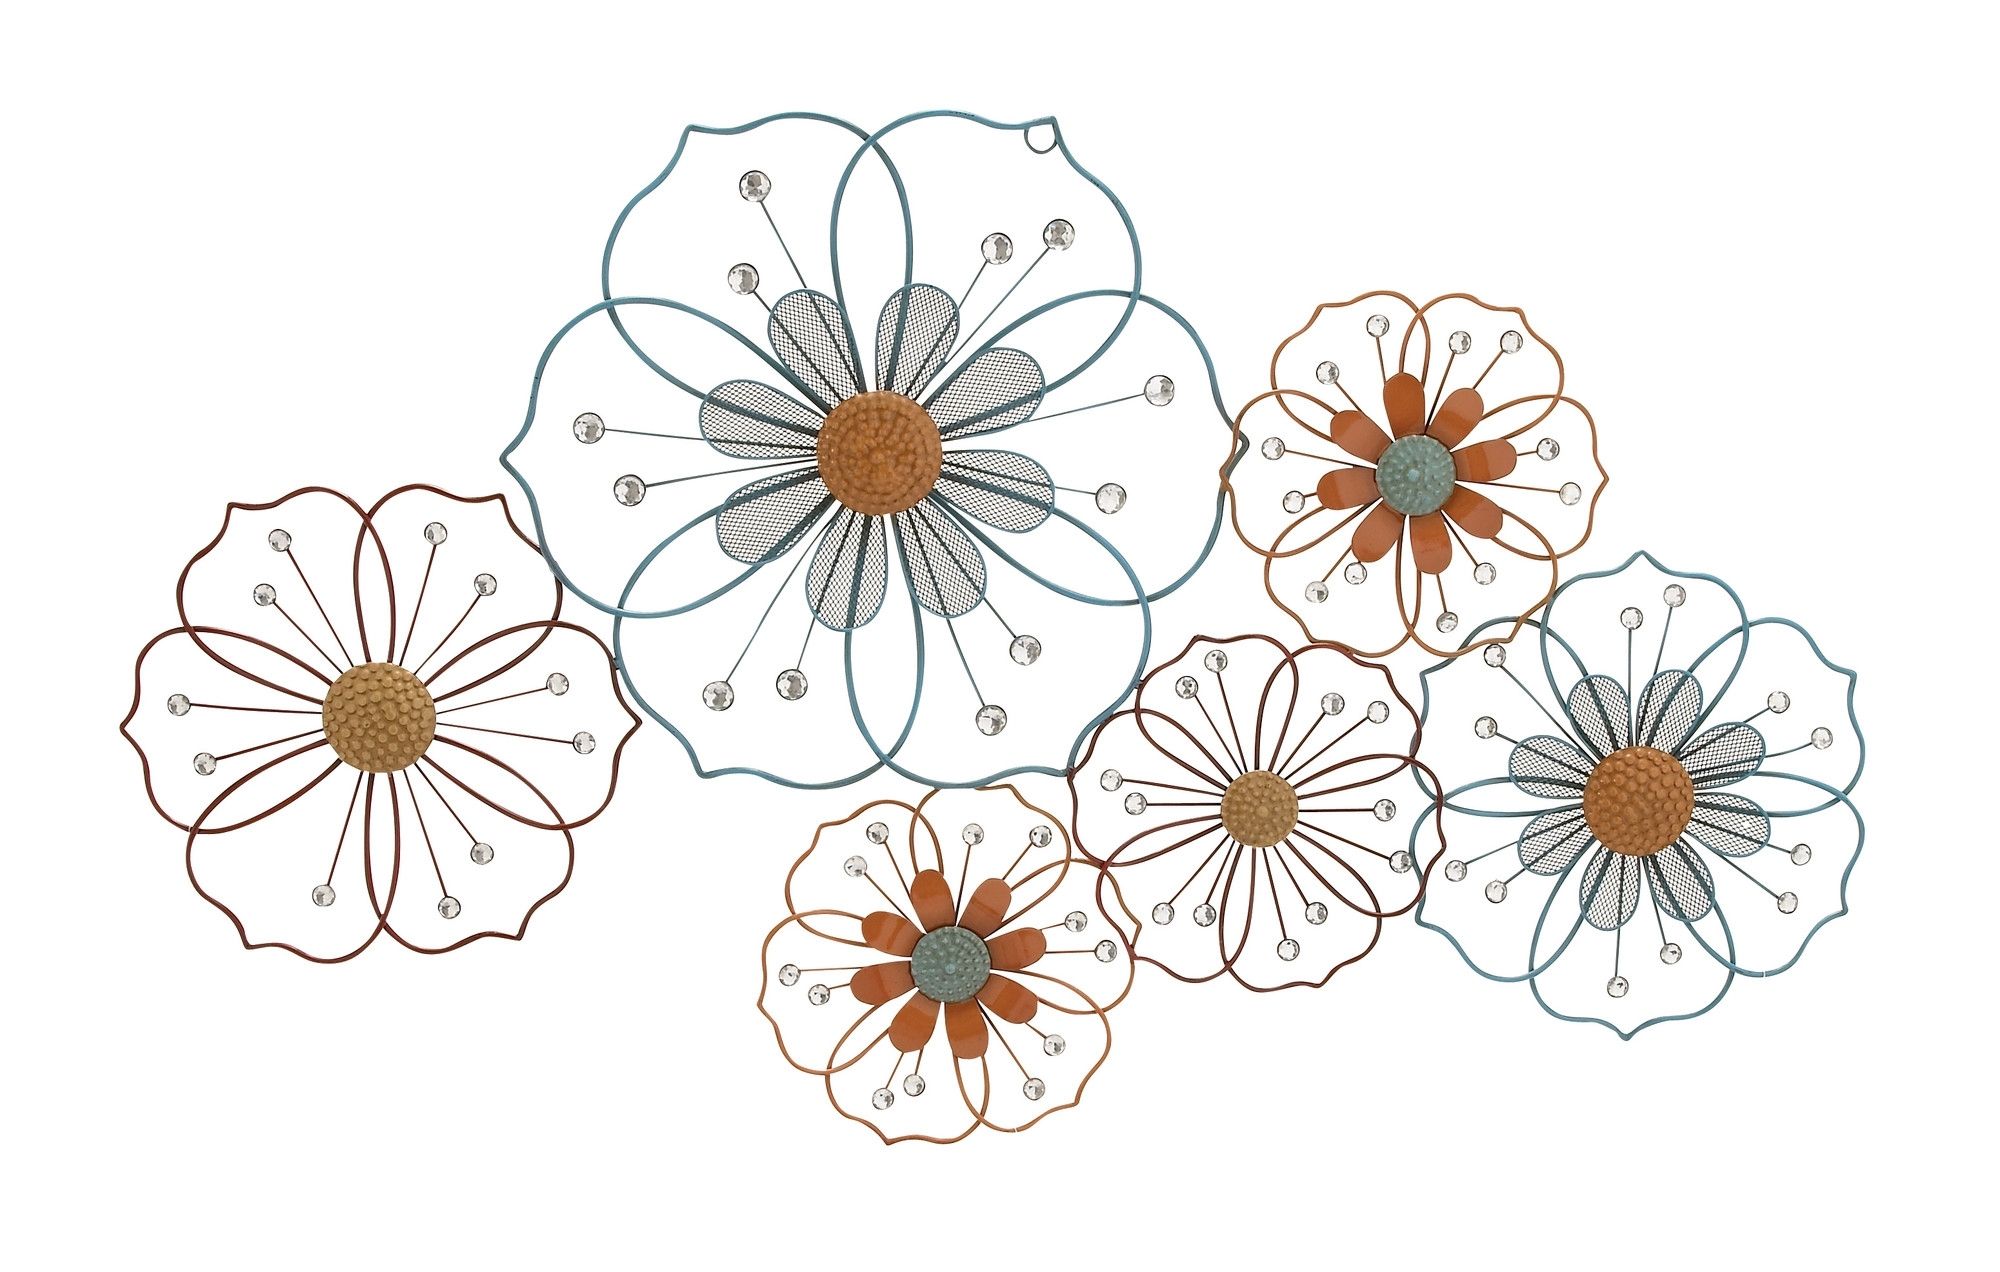 Large Flower Silhouettes – Floral Metal Wall Art With Regard To Floral Wall Art (View 15 of 20)